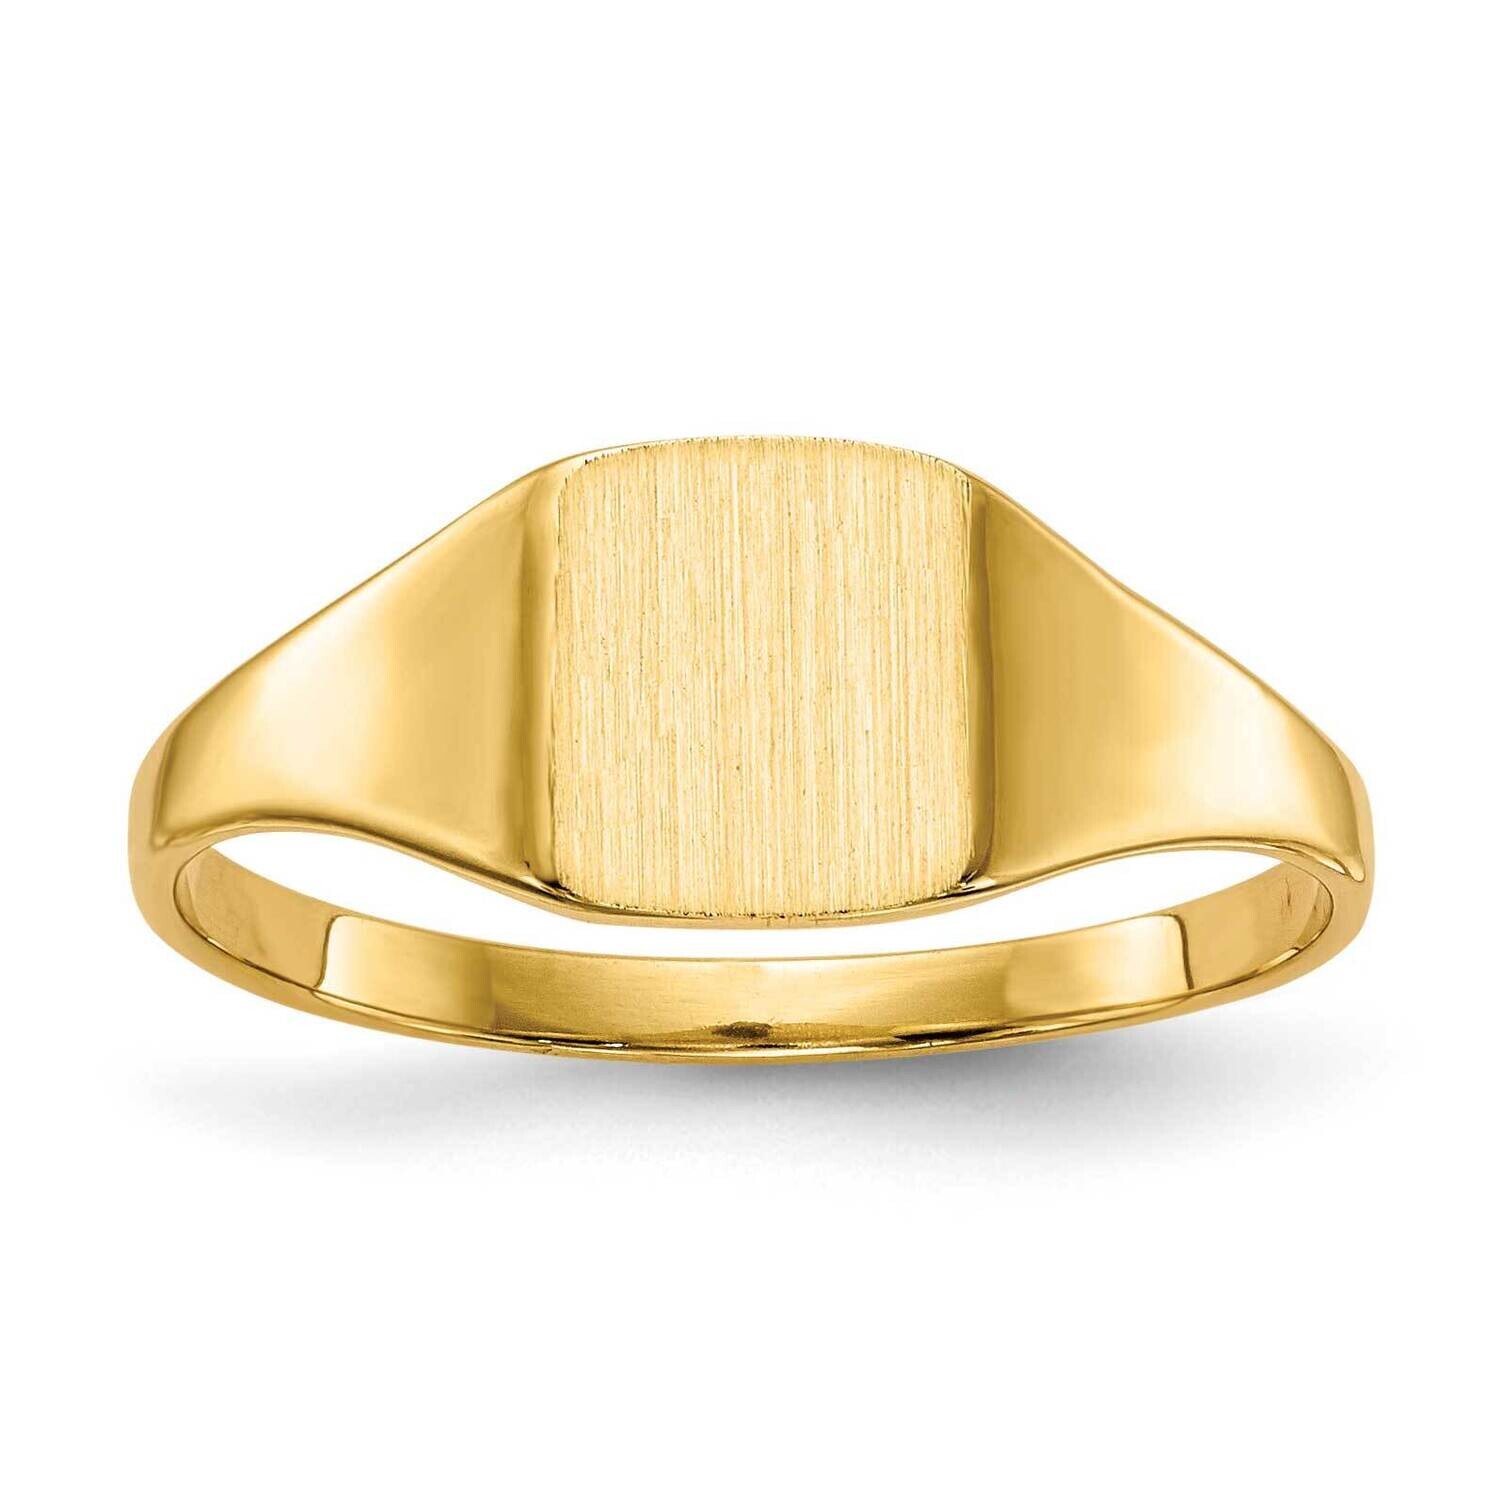 6.5 x 7 Inch.0mm Closed Back Signet Ring 10k Gold 10RS356